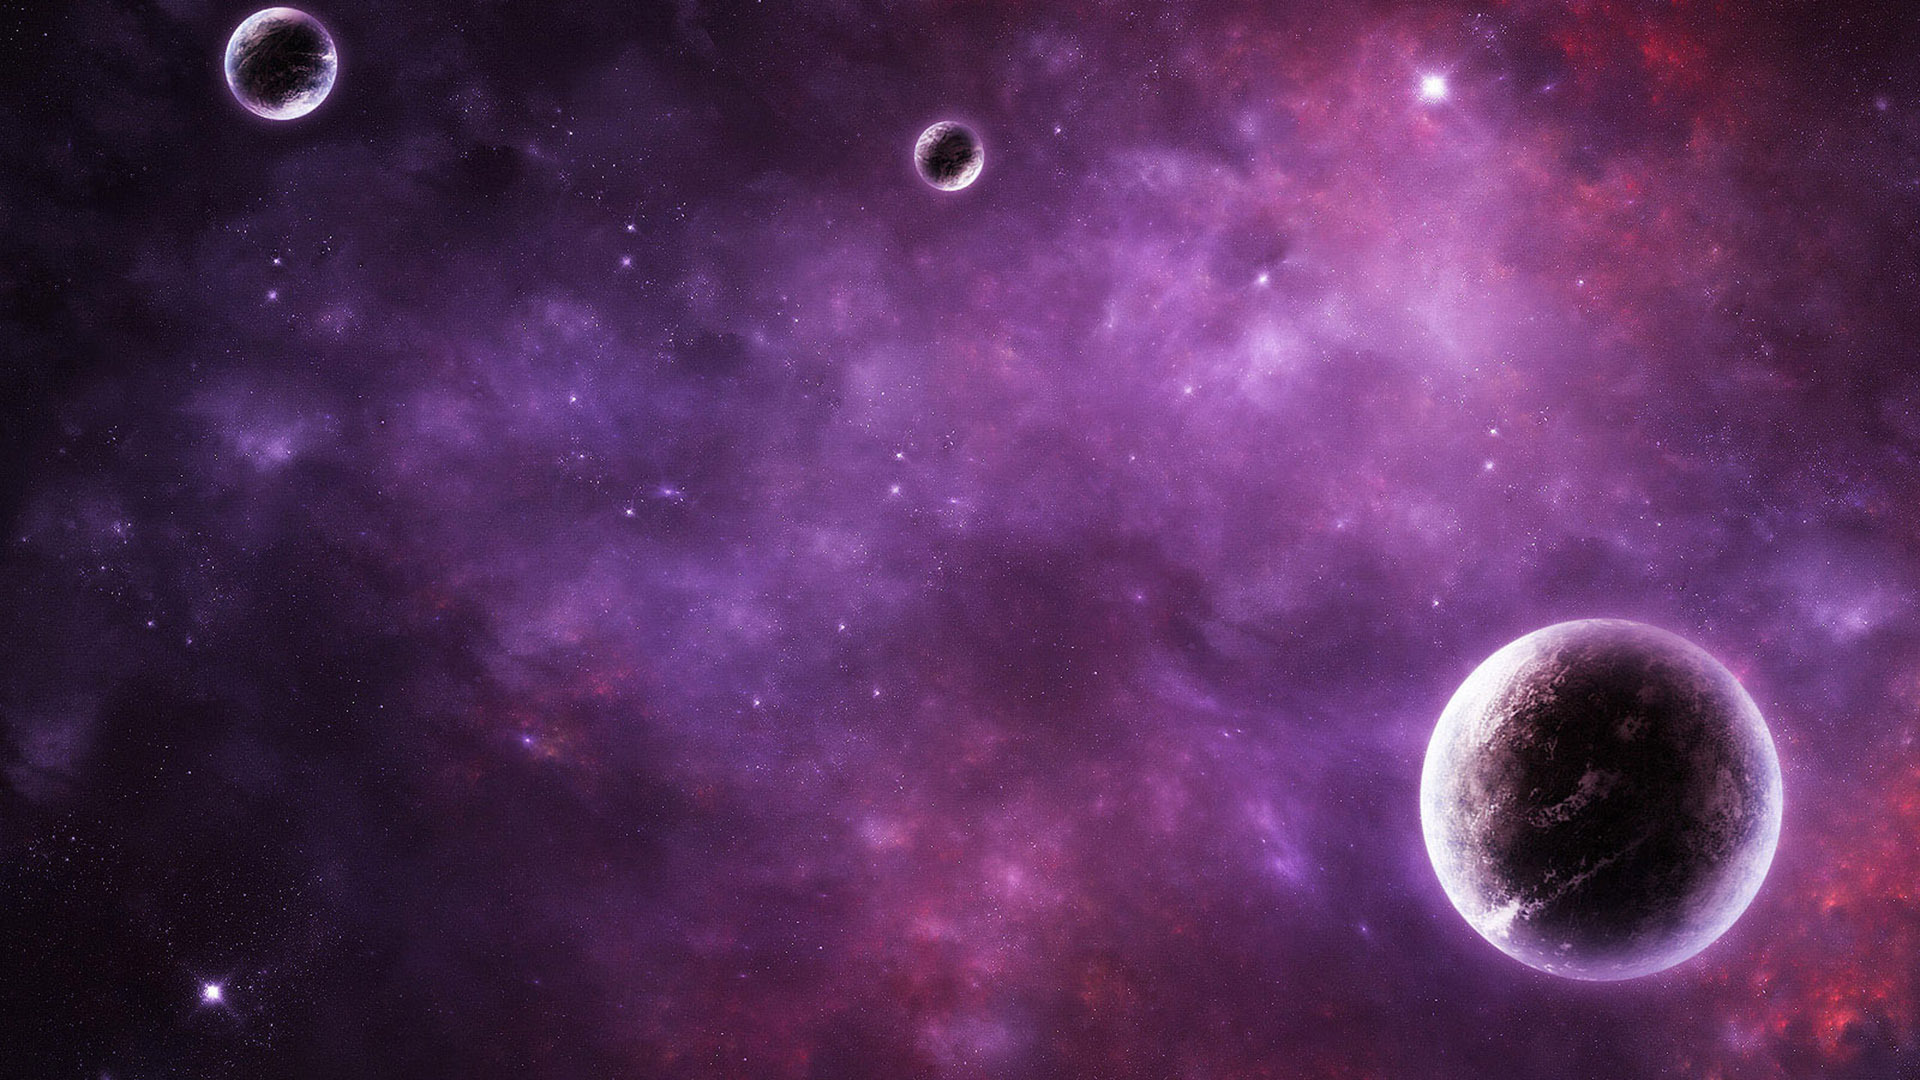 Artistic Purple Planet Wallpapers